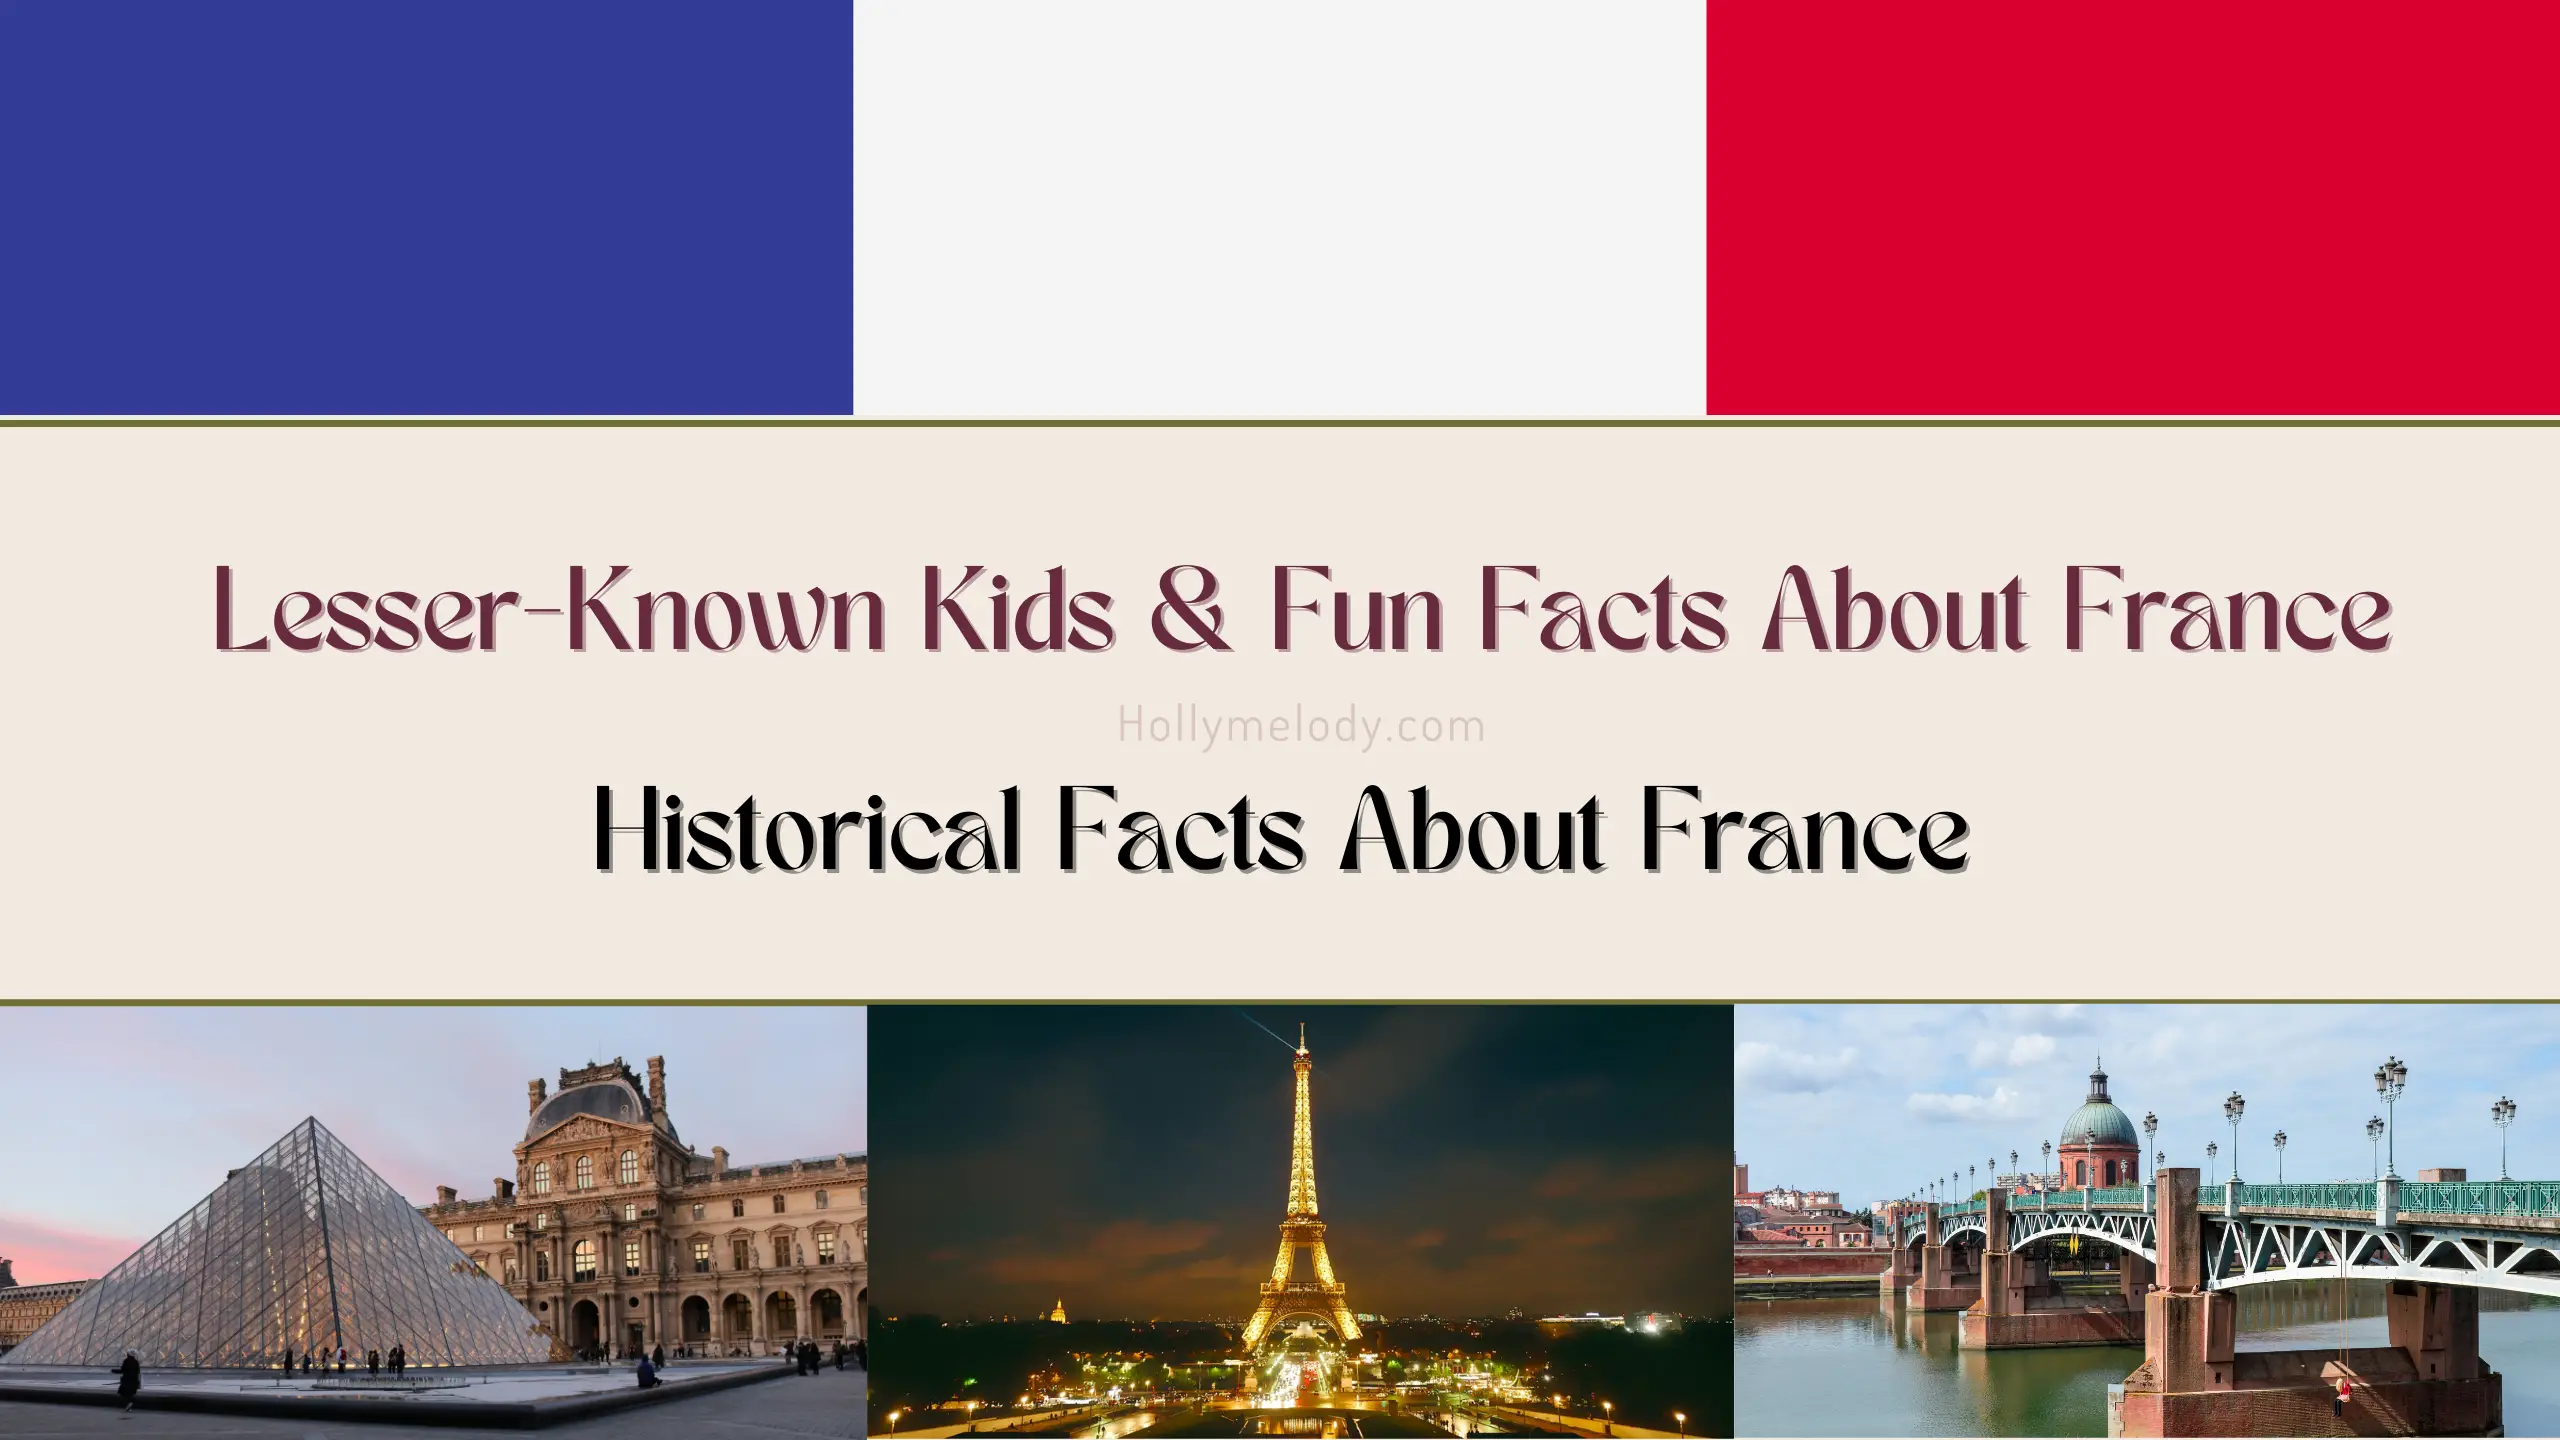 Lesser-Known Kids & Fun Facts About France | Historical Facts About France